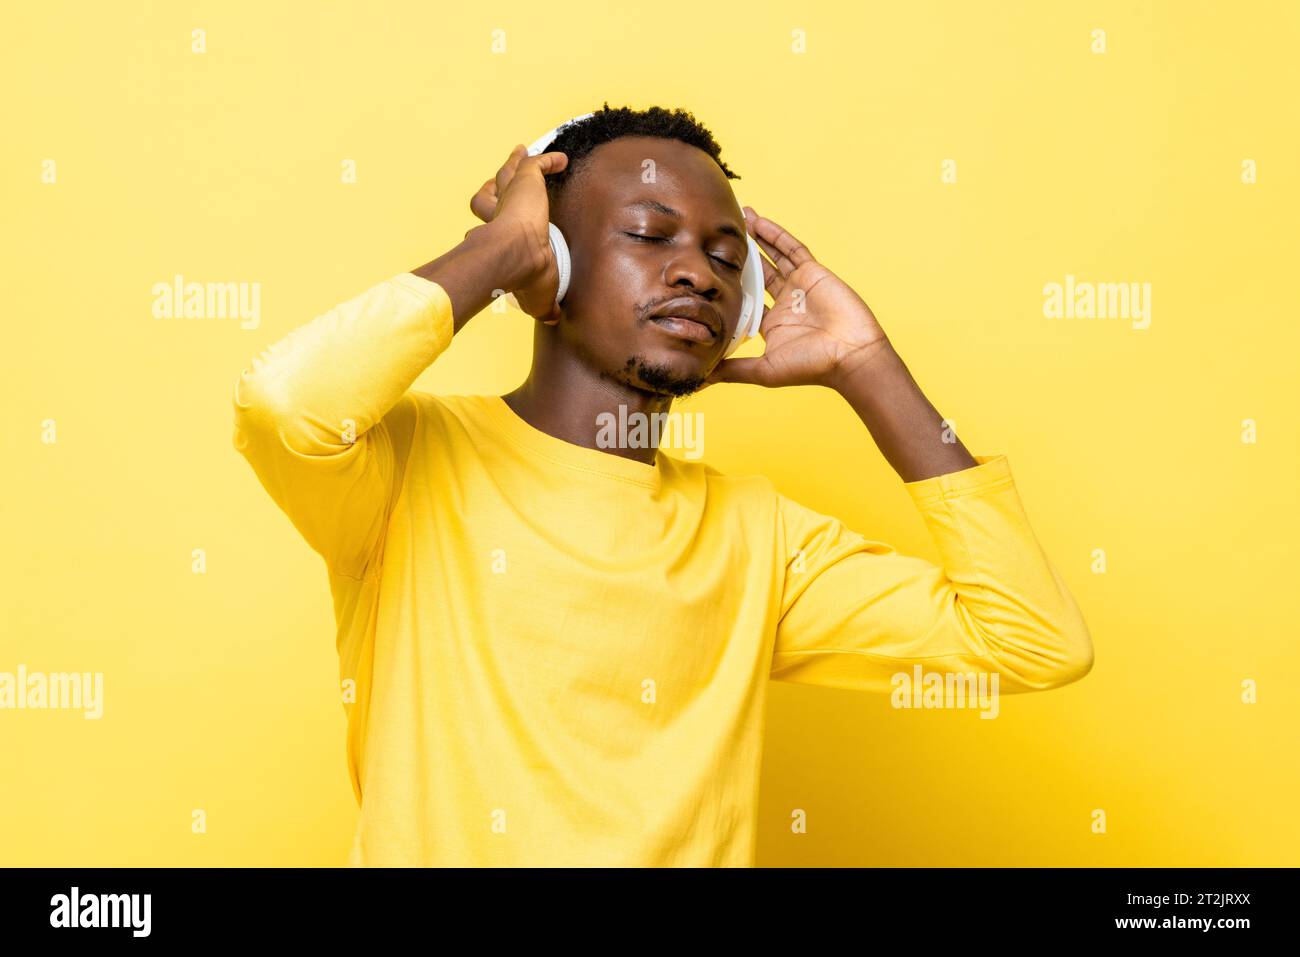 Young African man listening to music with eyes closed while holding headphones against yellow studio background Stock Photo